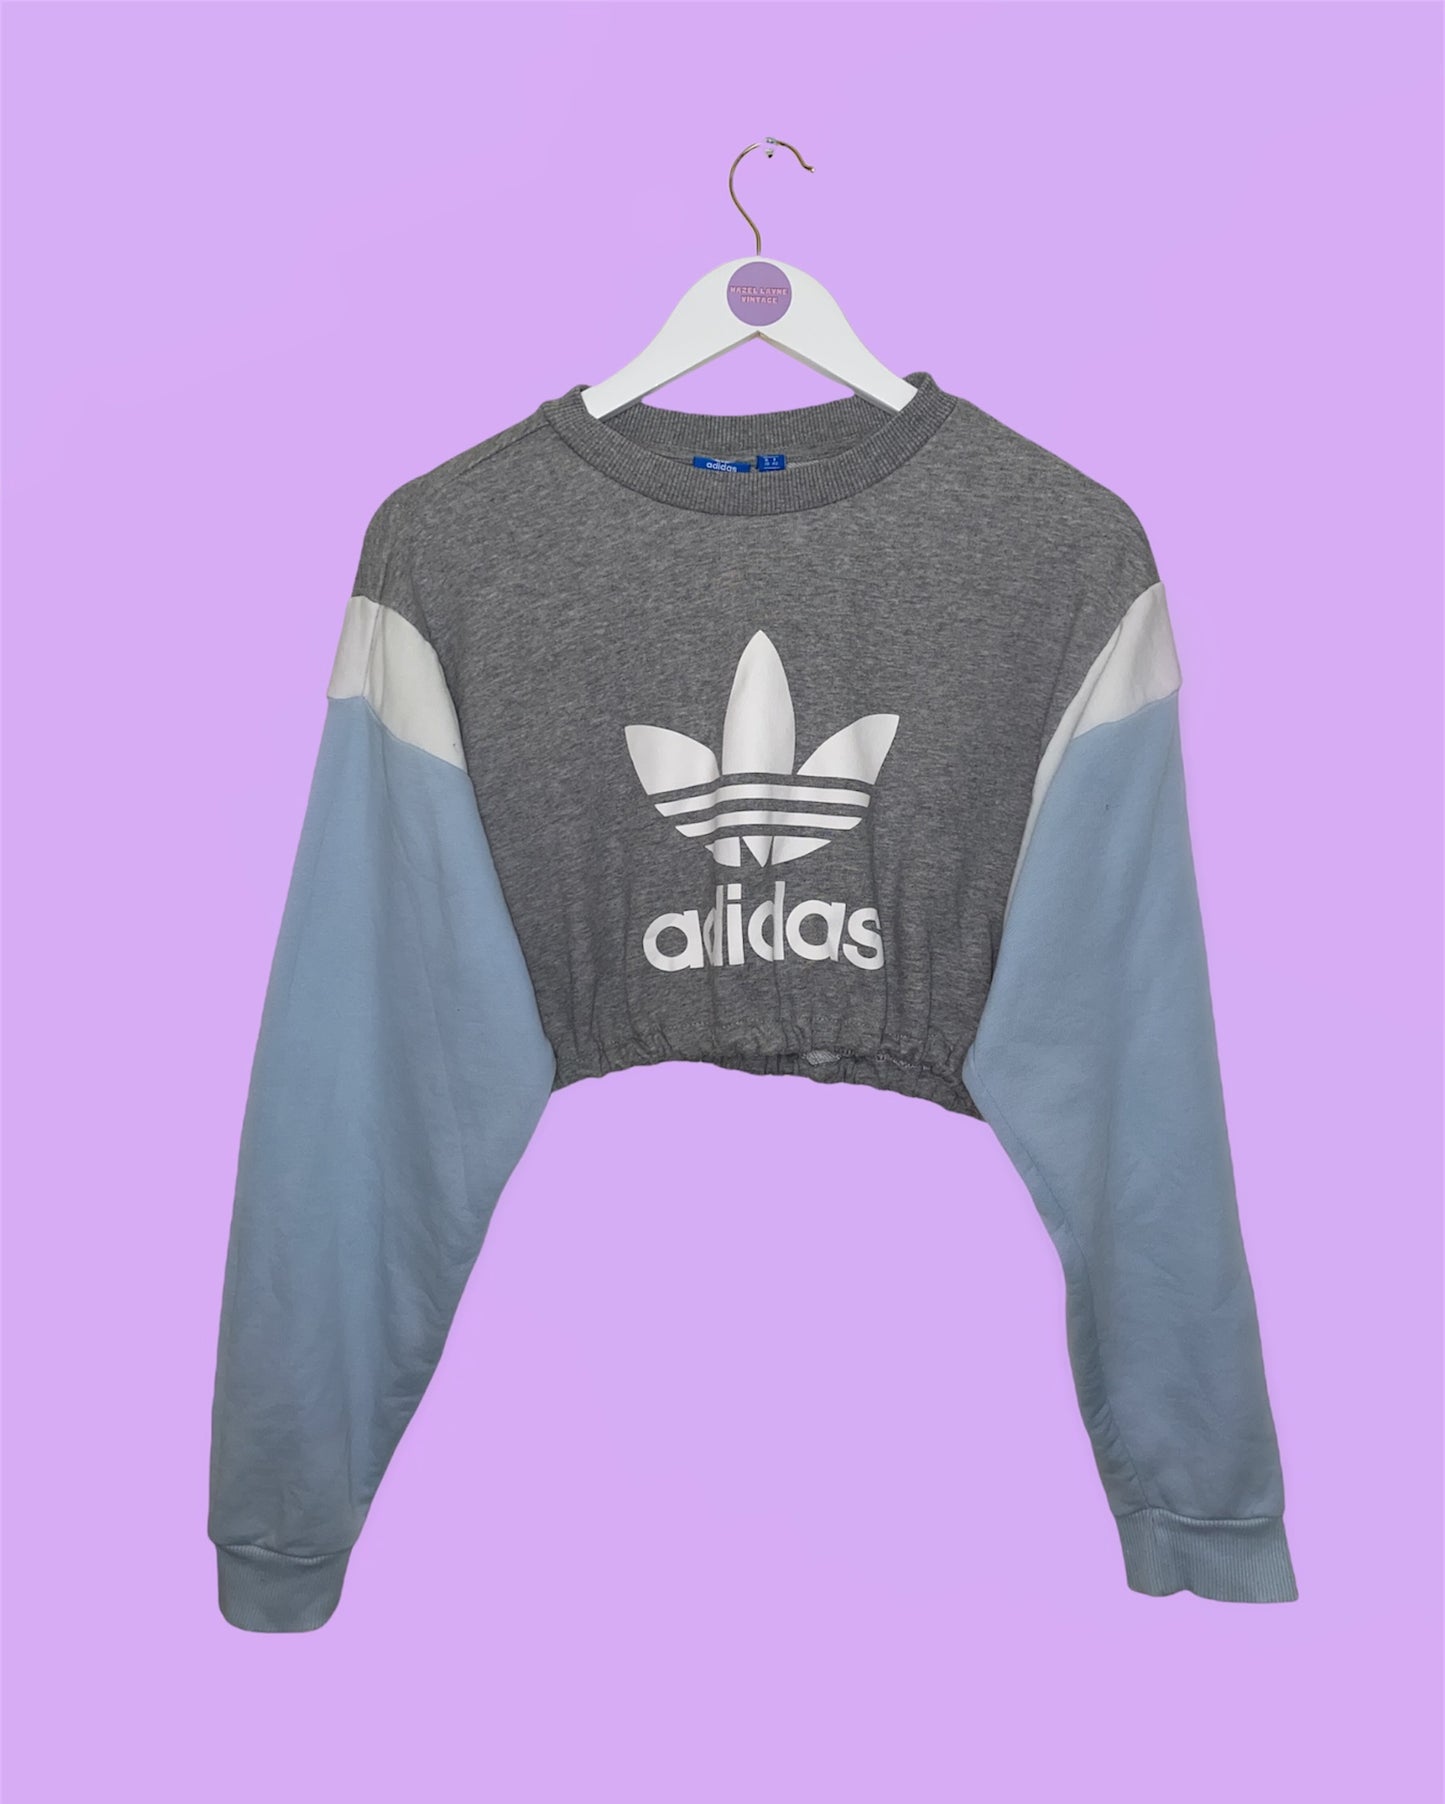 grey cropped sweatshirt with light blue sleeves and white big text and symbol adidas logo shown on a white clothes hanger on a lilac background